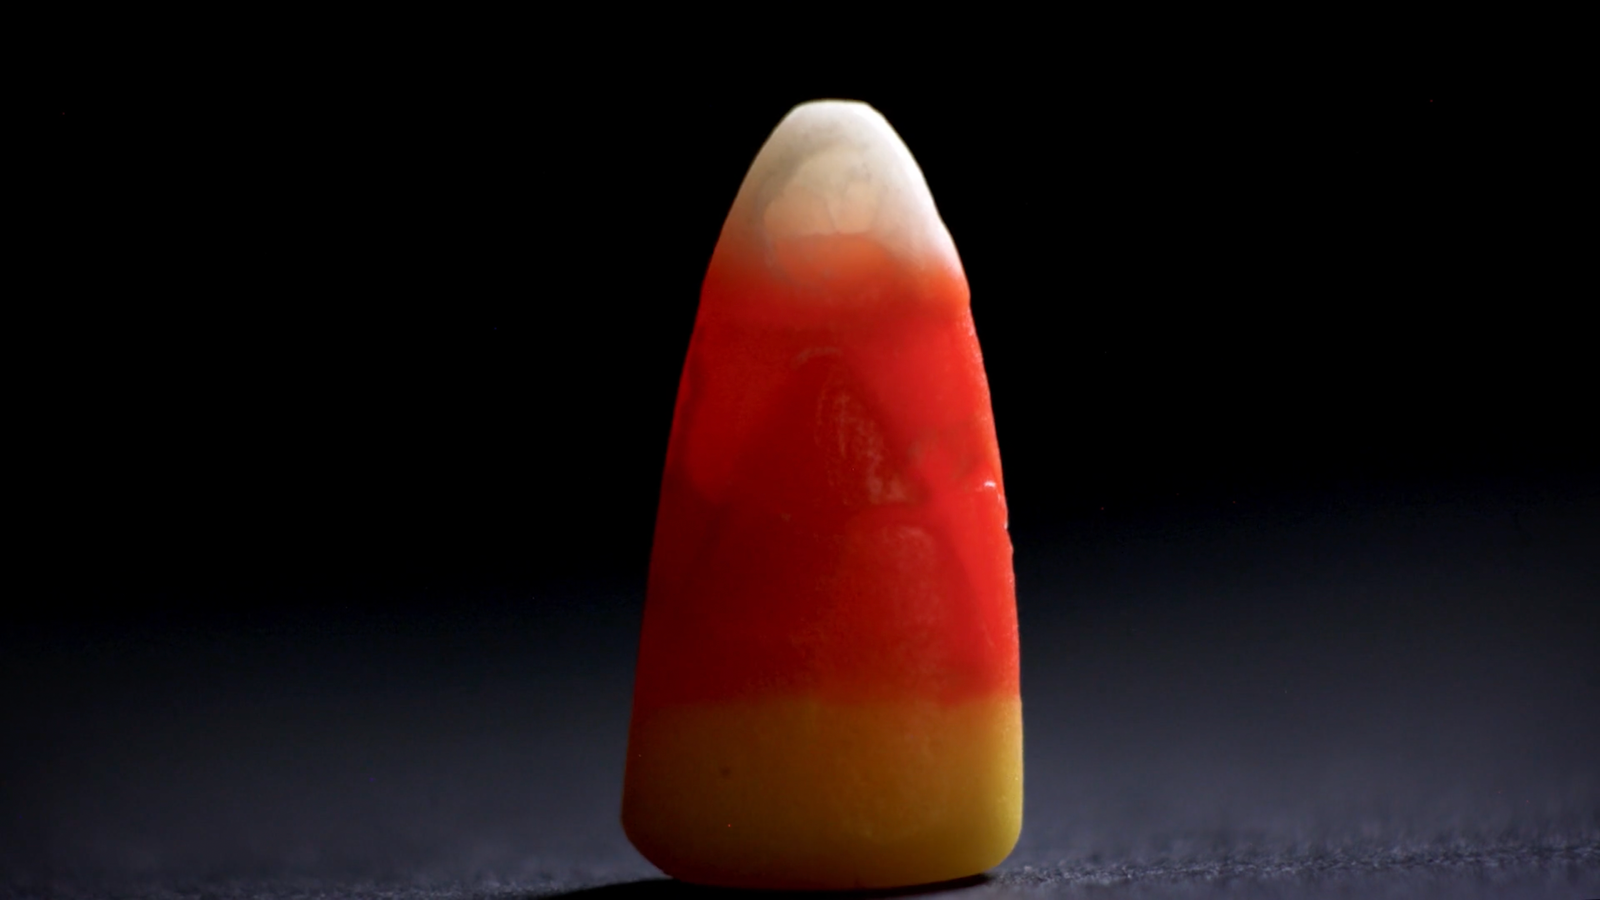 Animated short film about candy corn, the best halloween candy that there is. Produced by Lunch & Recess in Charleston, SC.